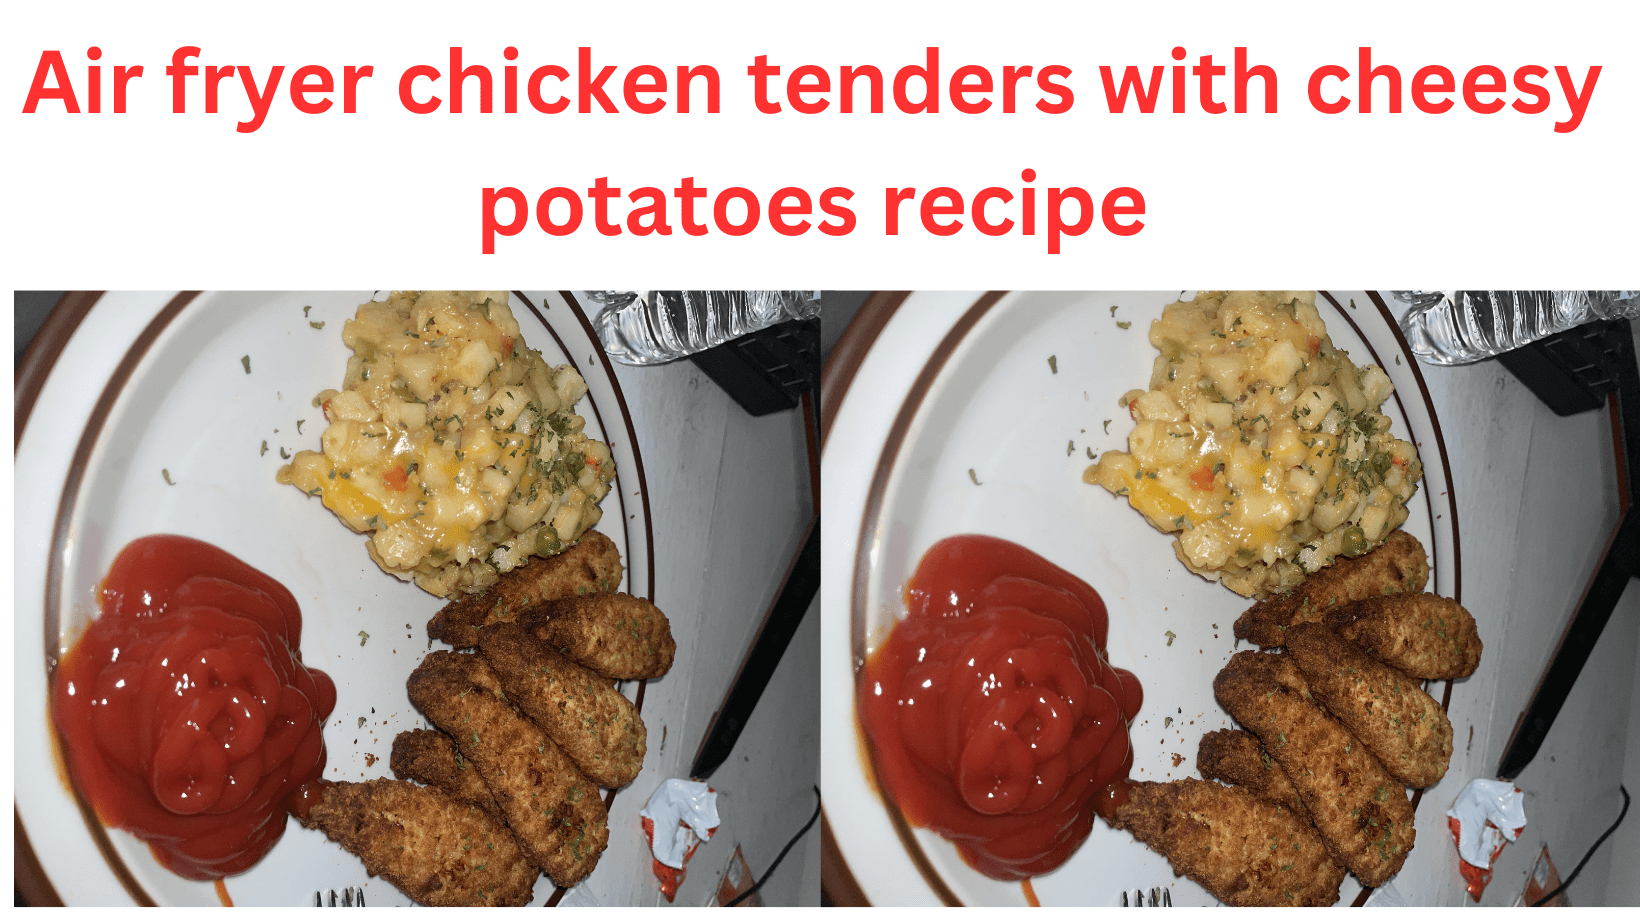 Air fryer chicken tenders with cheesy potatoes recipe